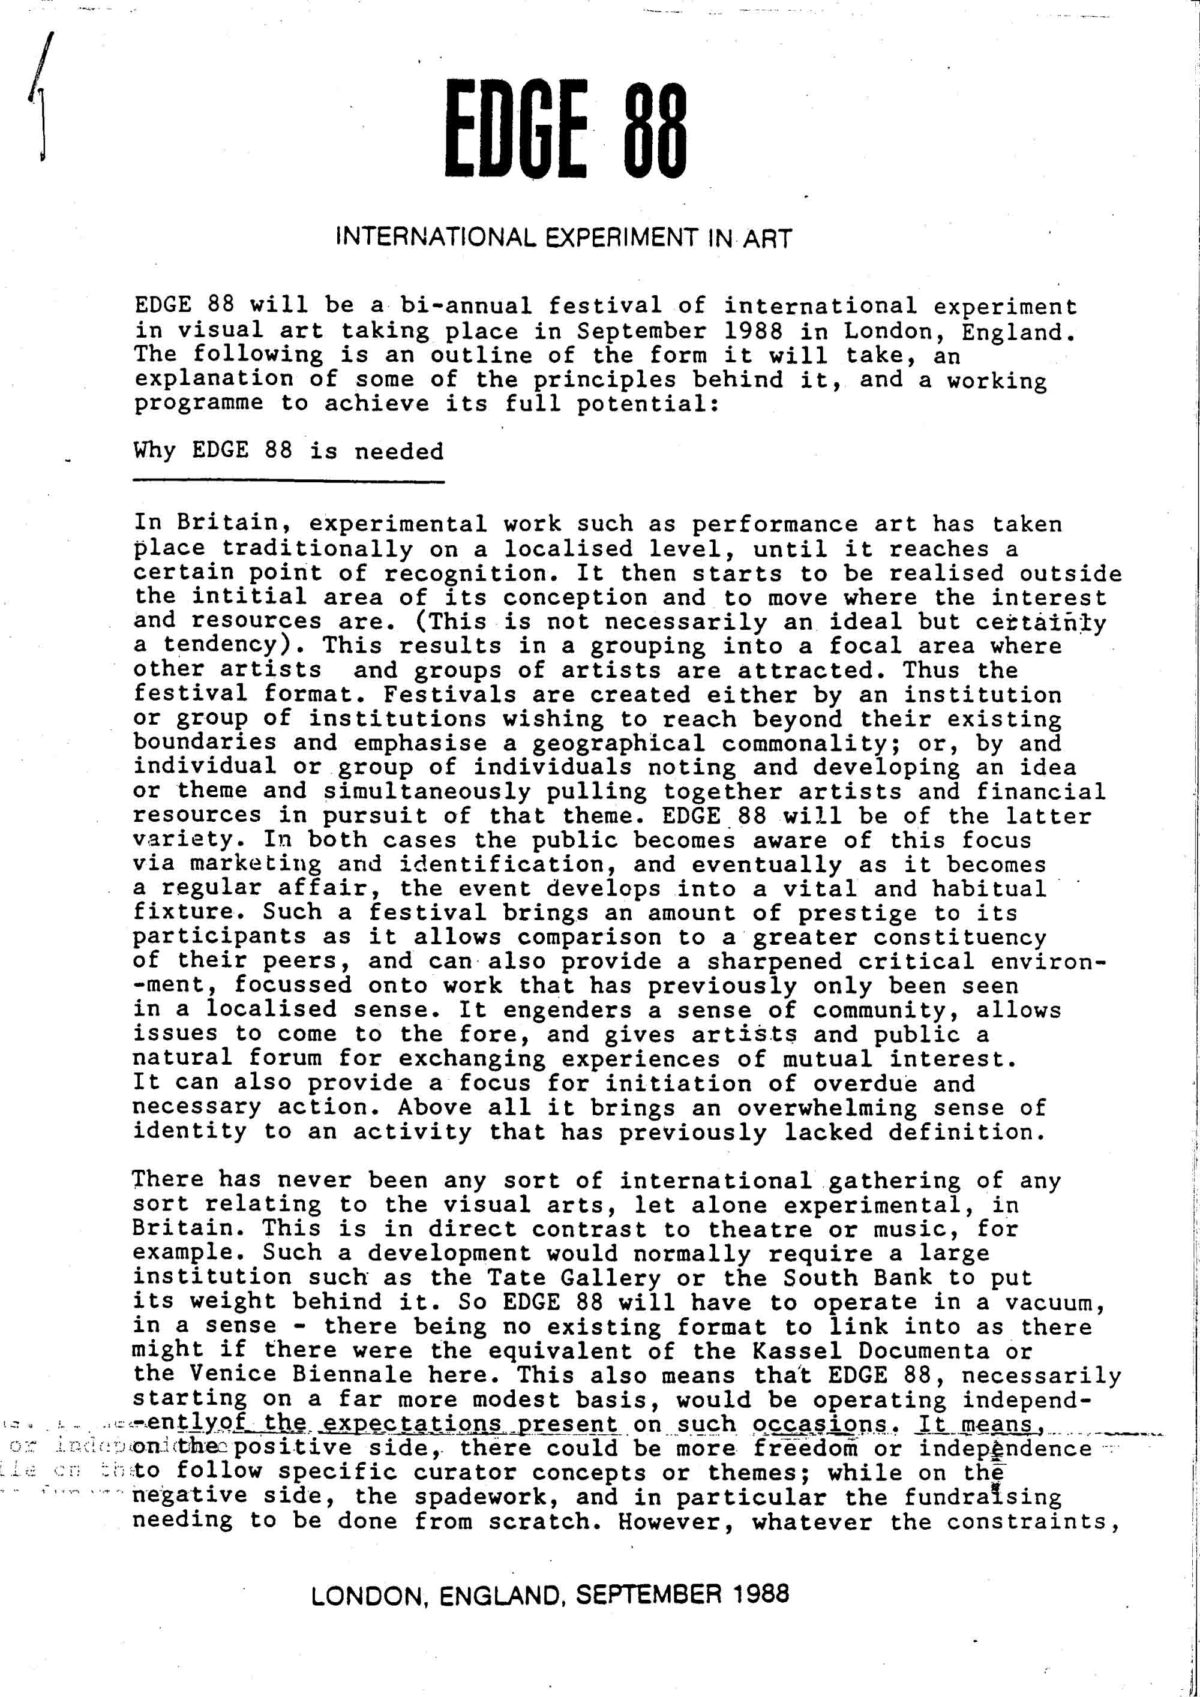 Rationale, 1988 (Page 1 of 5)